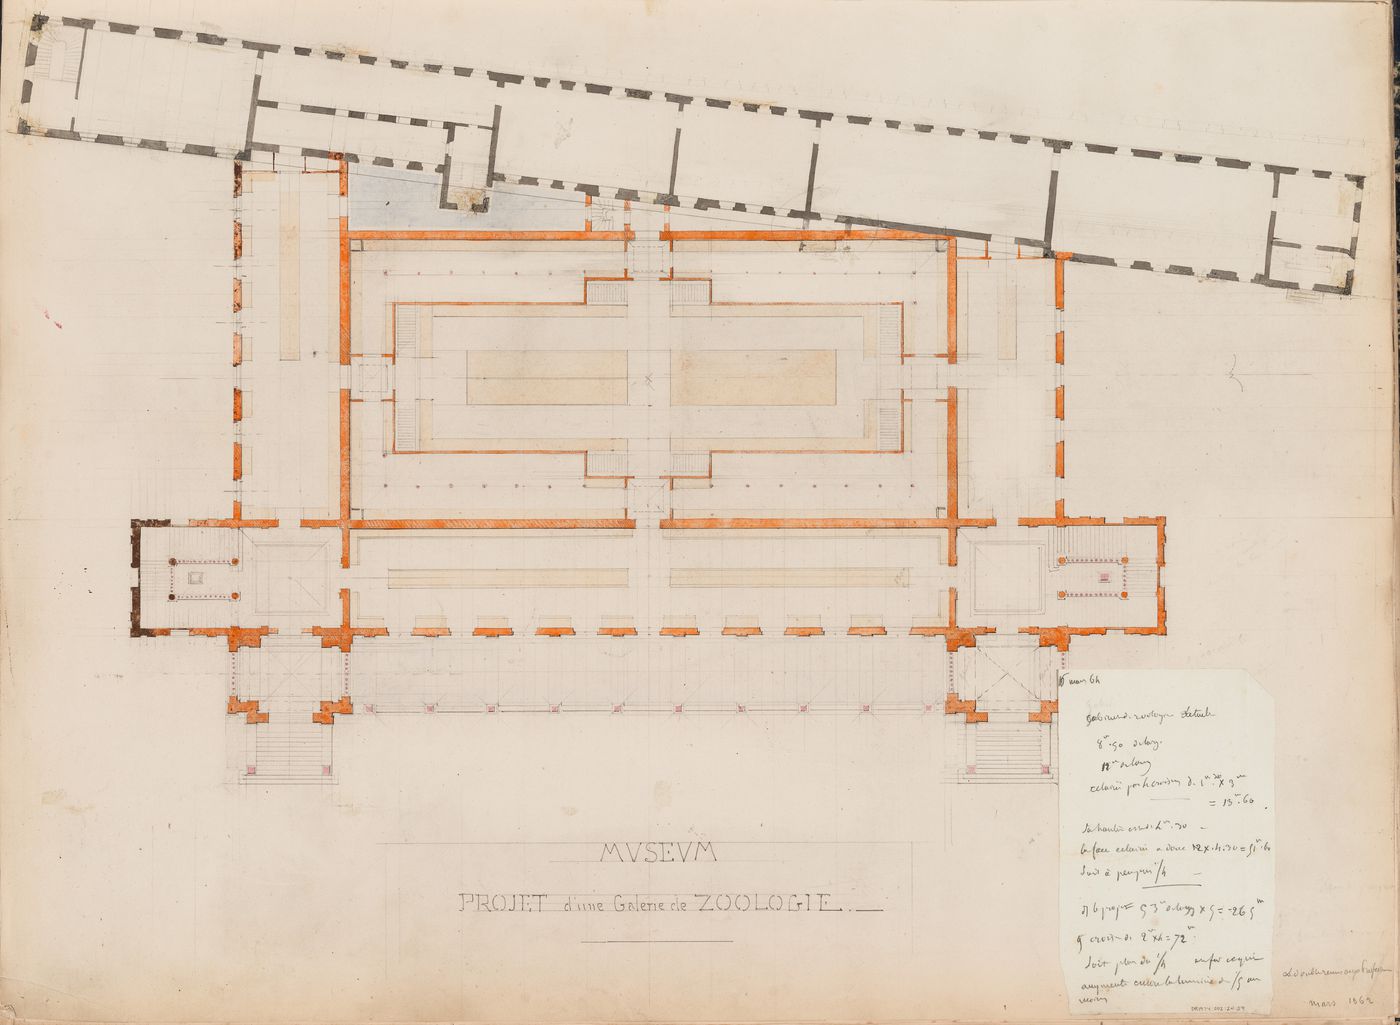 Project for a Galerie de zoologie, 1862: Ground floor plan with an attached note